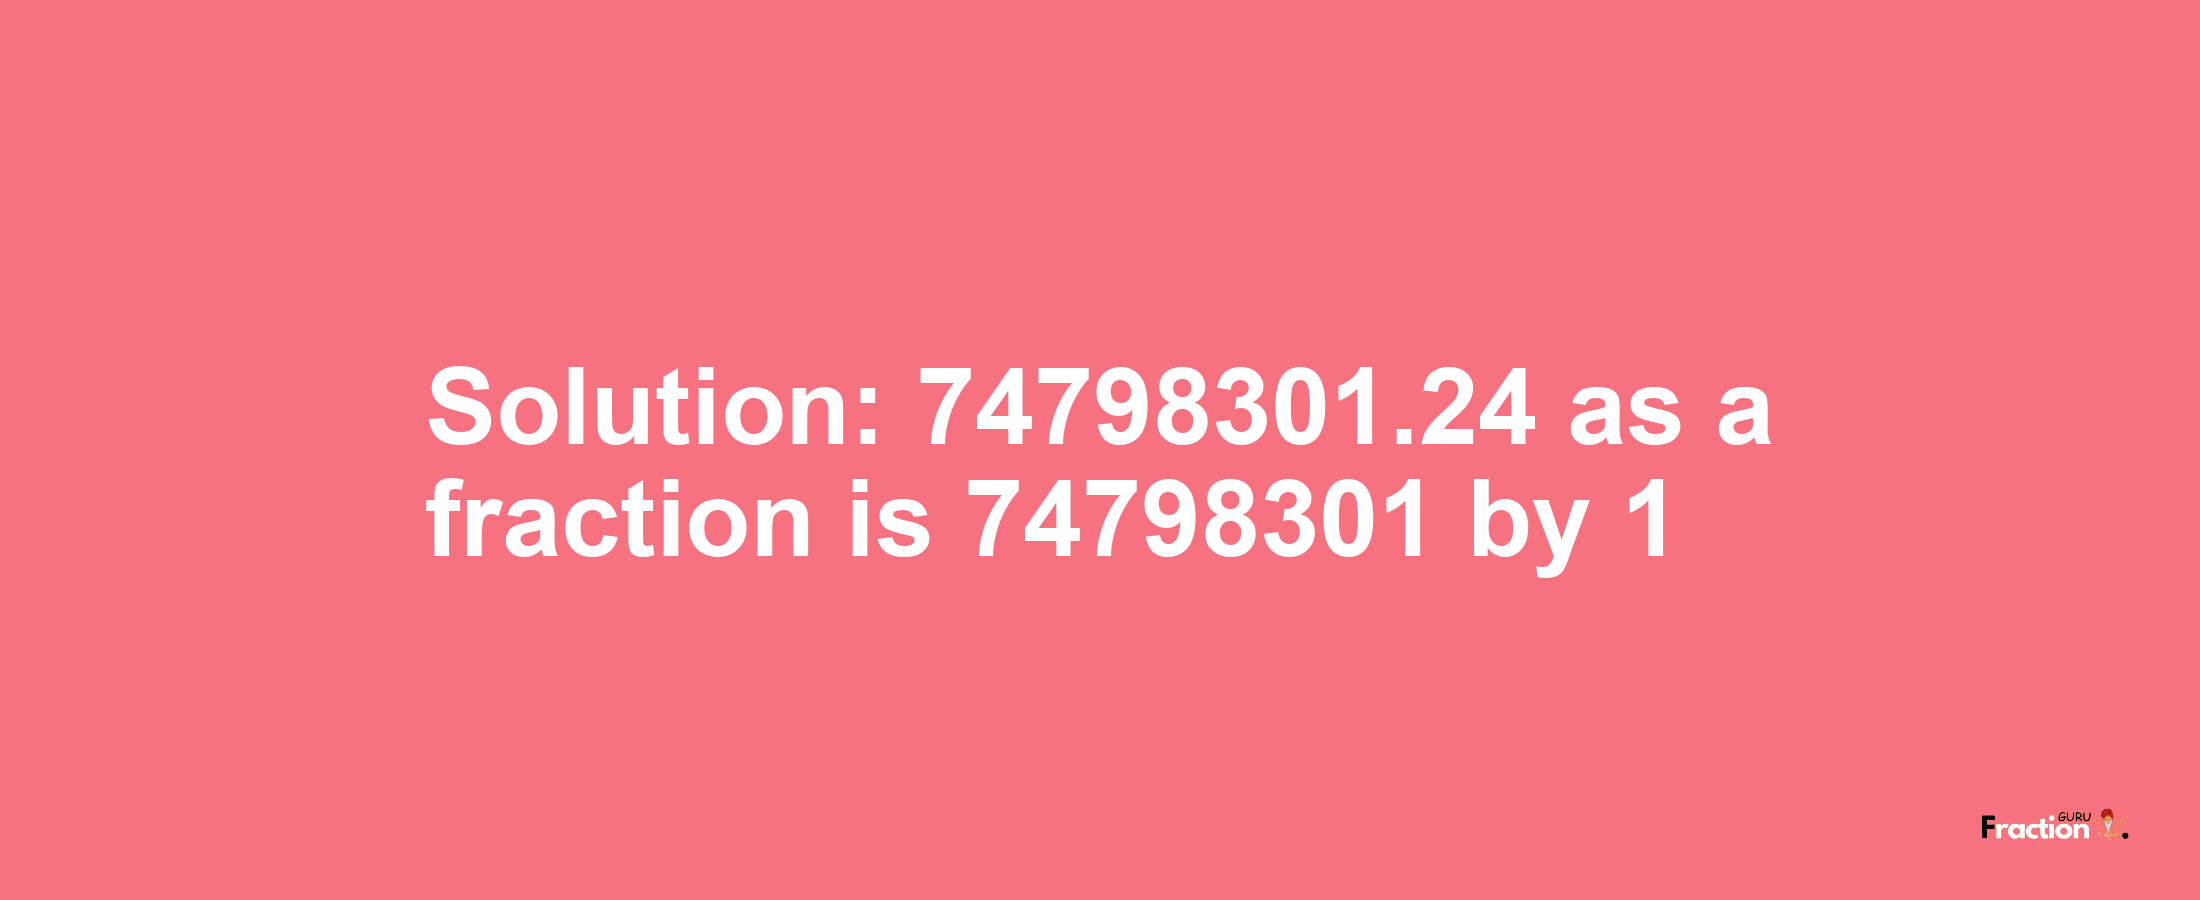 Solution:74798301.24 as a fraction is 74798301/1